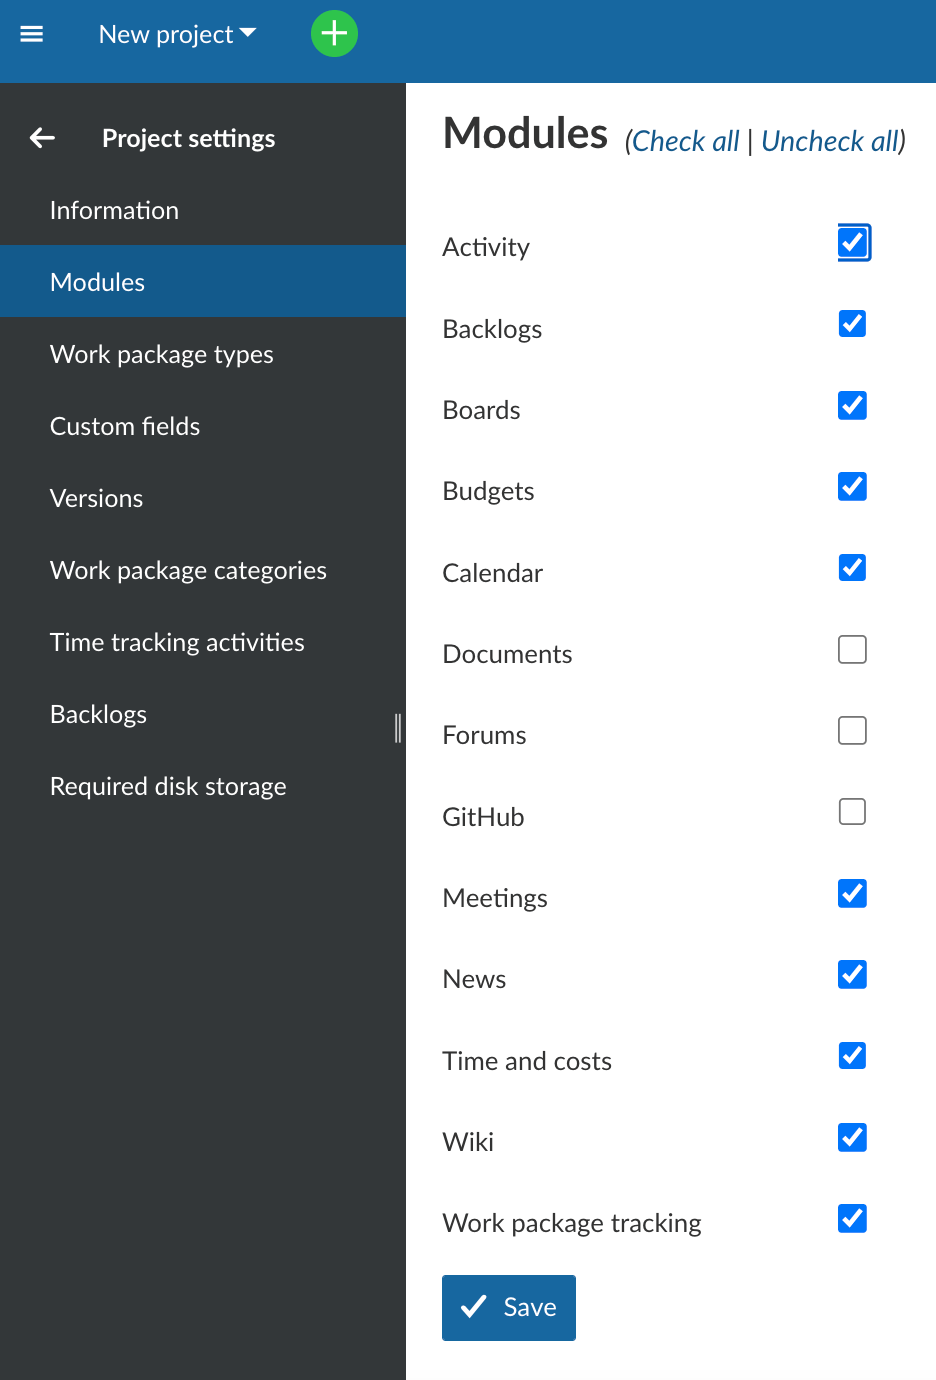 showing all modules with tick boxes to activate or deactivate